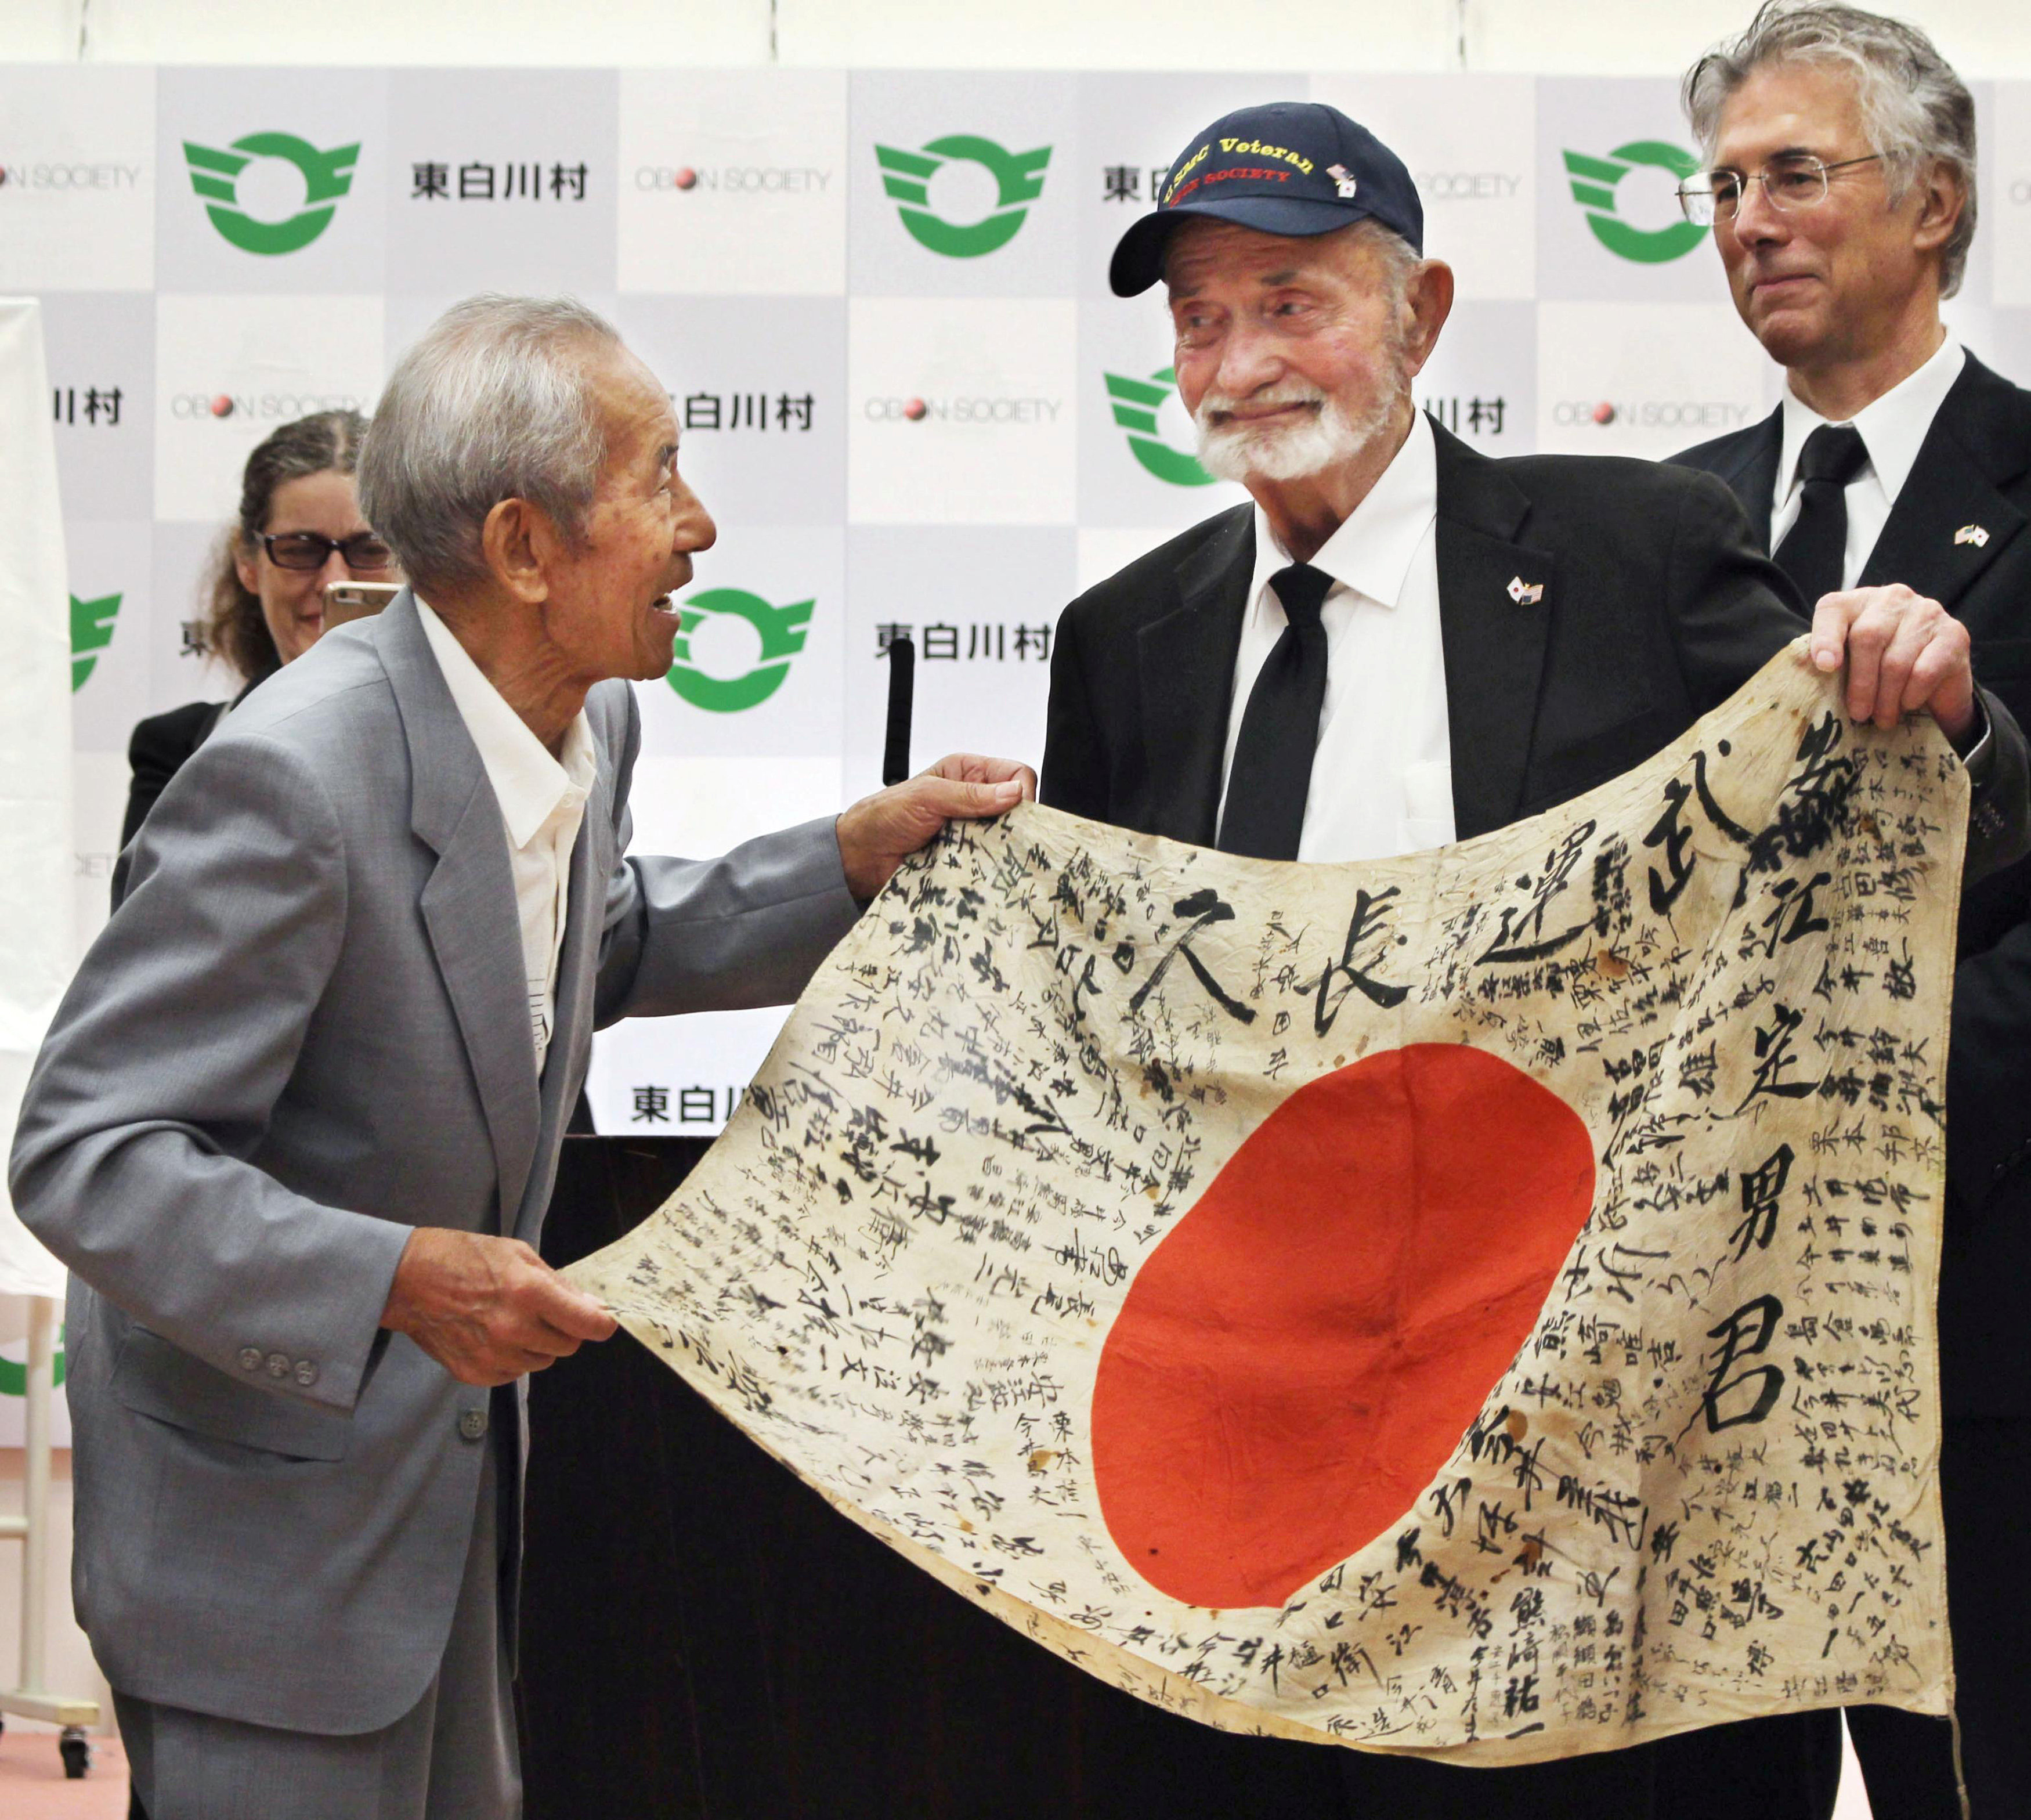 U.S. WW II veteran returns flag to family of fallen Japanese soldier after 72 years